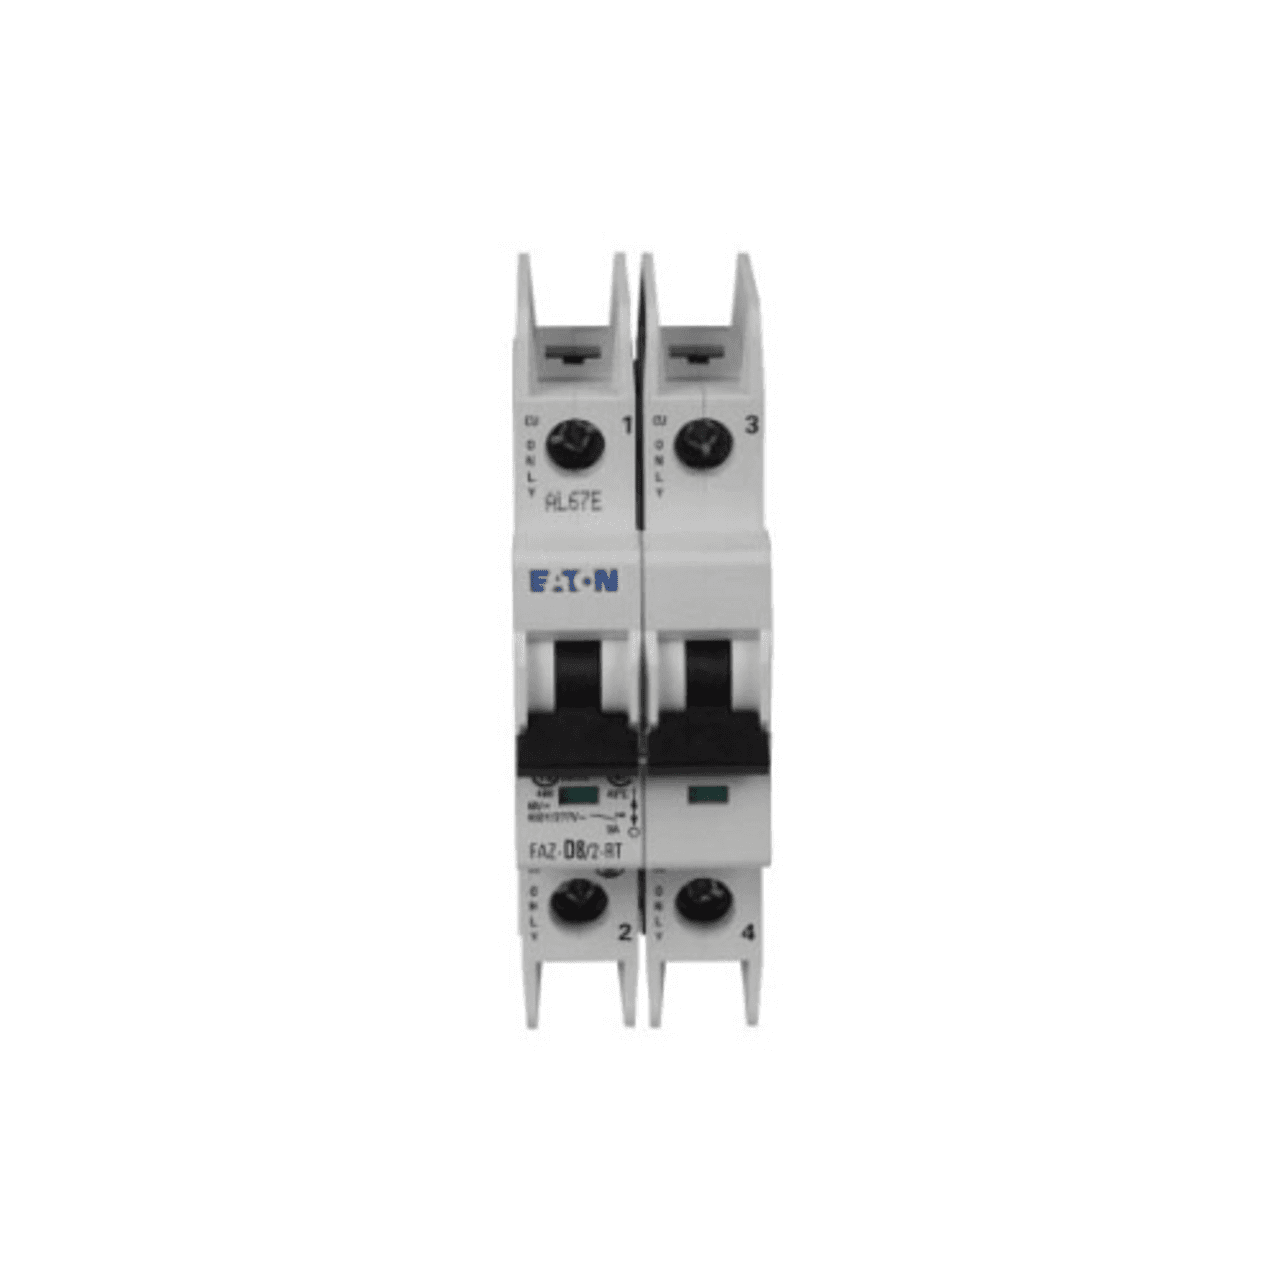 Eaton FAZ-D7/2-NA 277/480 VAC, 96 VDC, 7 A, 10 kA, 10 to 20 x Rated Current, 2-Pole, Screw Terminal, DIN Rail Mount, Current Limiting, Thermal Magnetic